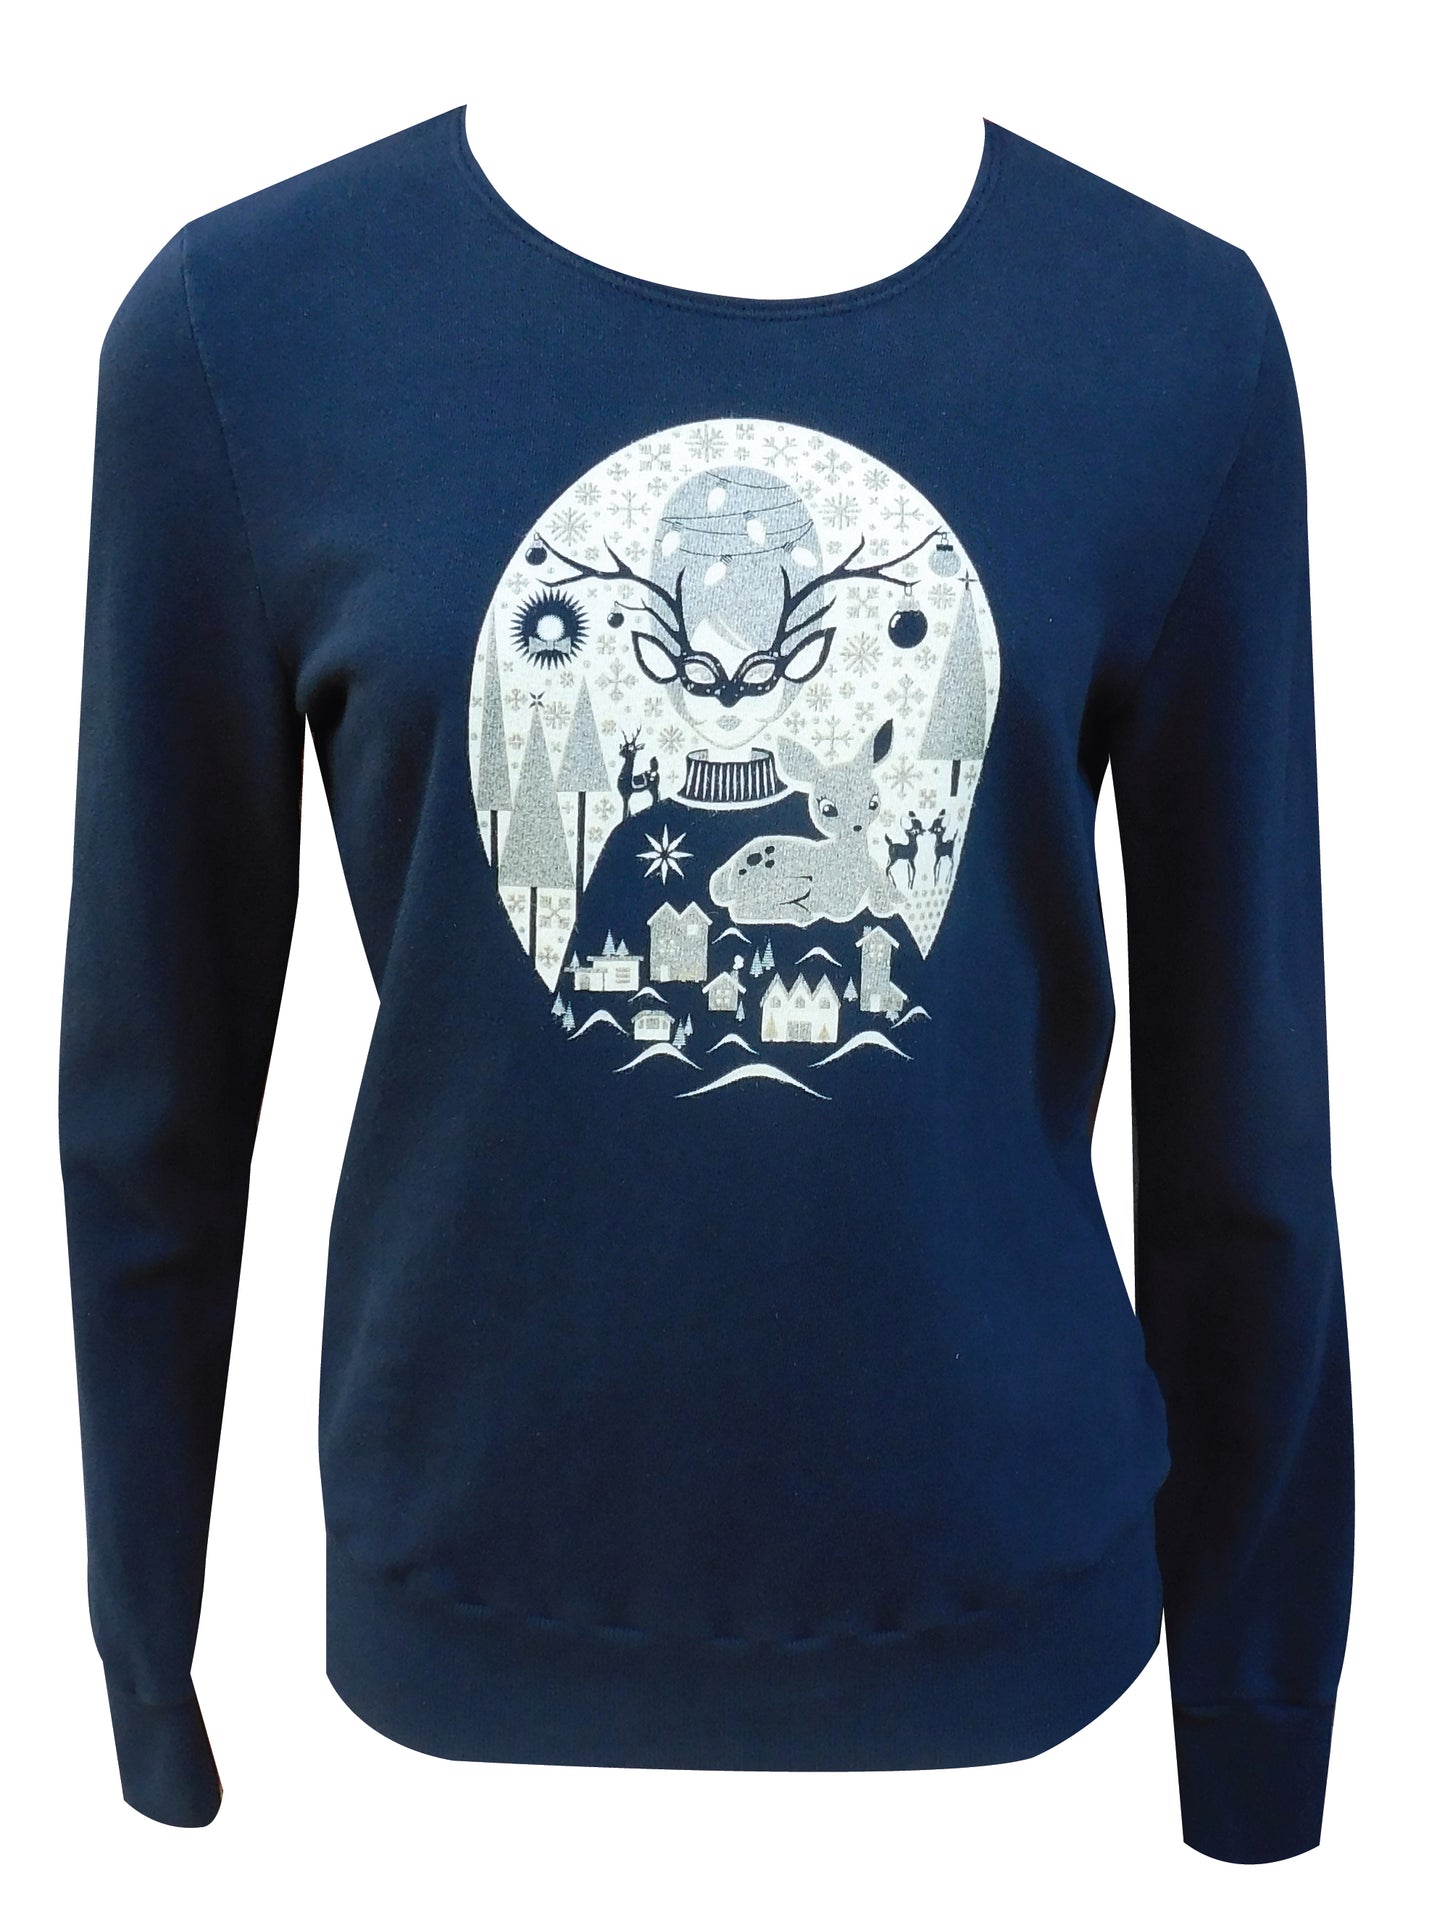 Black French terry pullover with sparkly gold and white print of Christmas girl with mask, reindeer, and pine trees